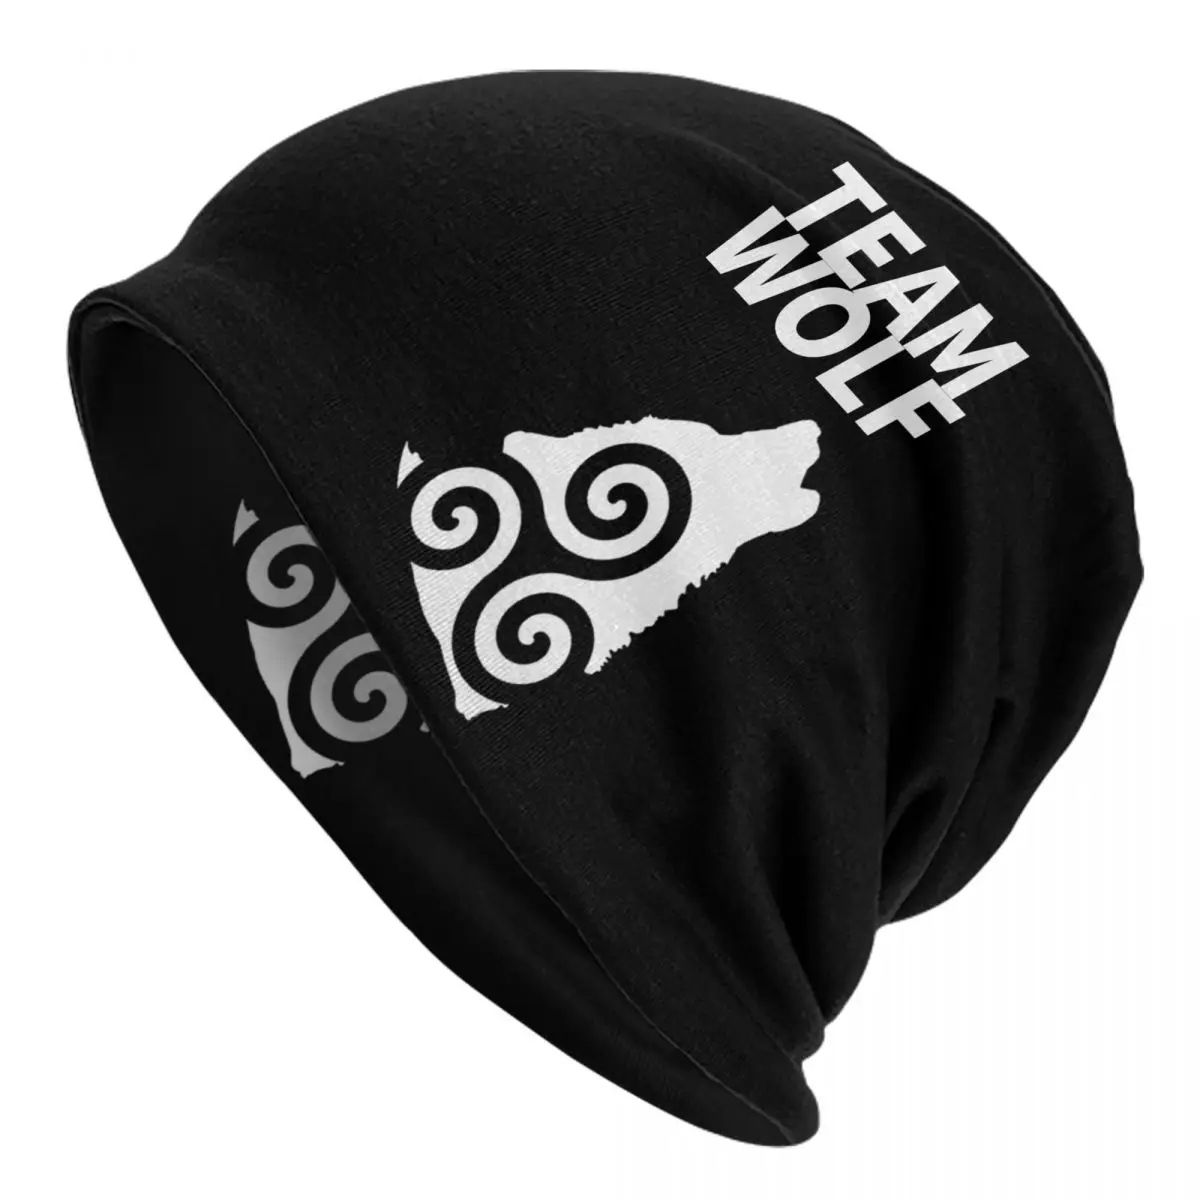 Team Wolf Adult Men's Women's Knit Hat Keep warm winter Funny knitted hat